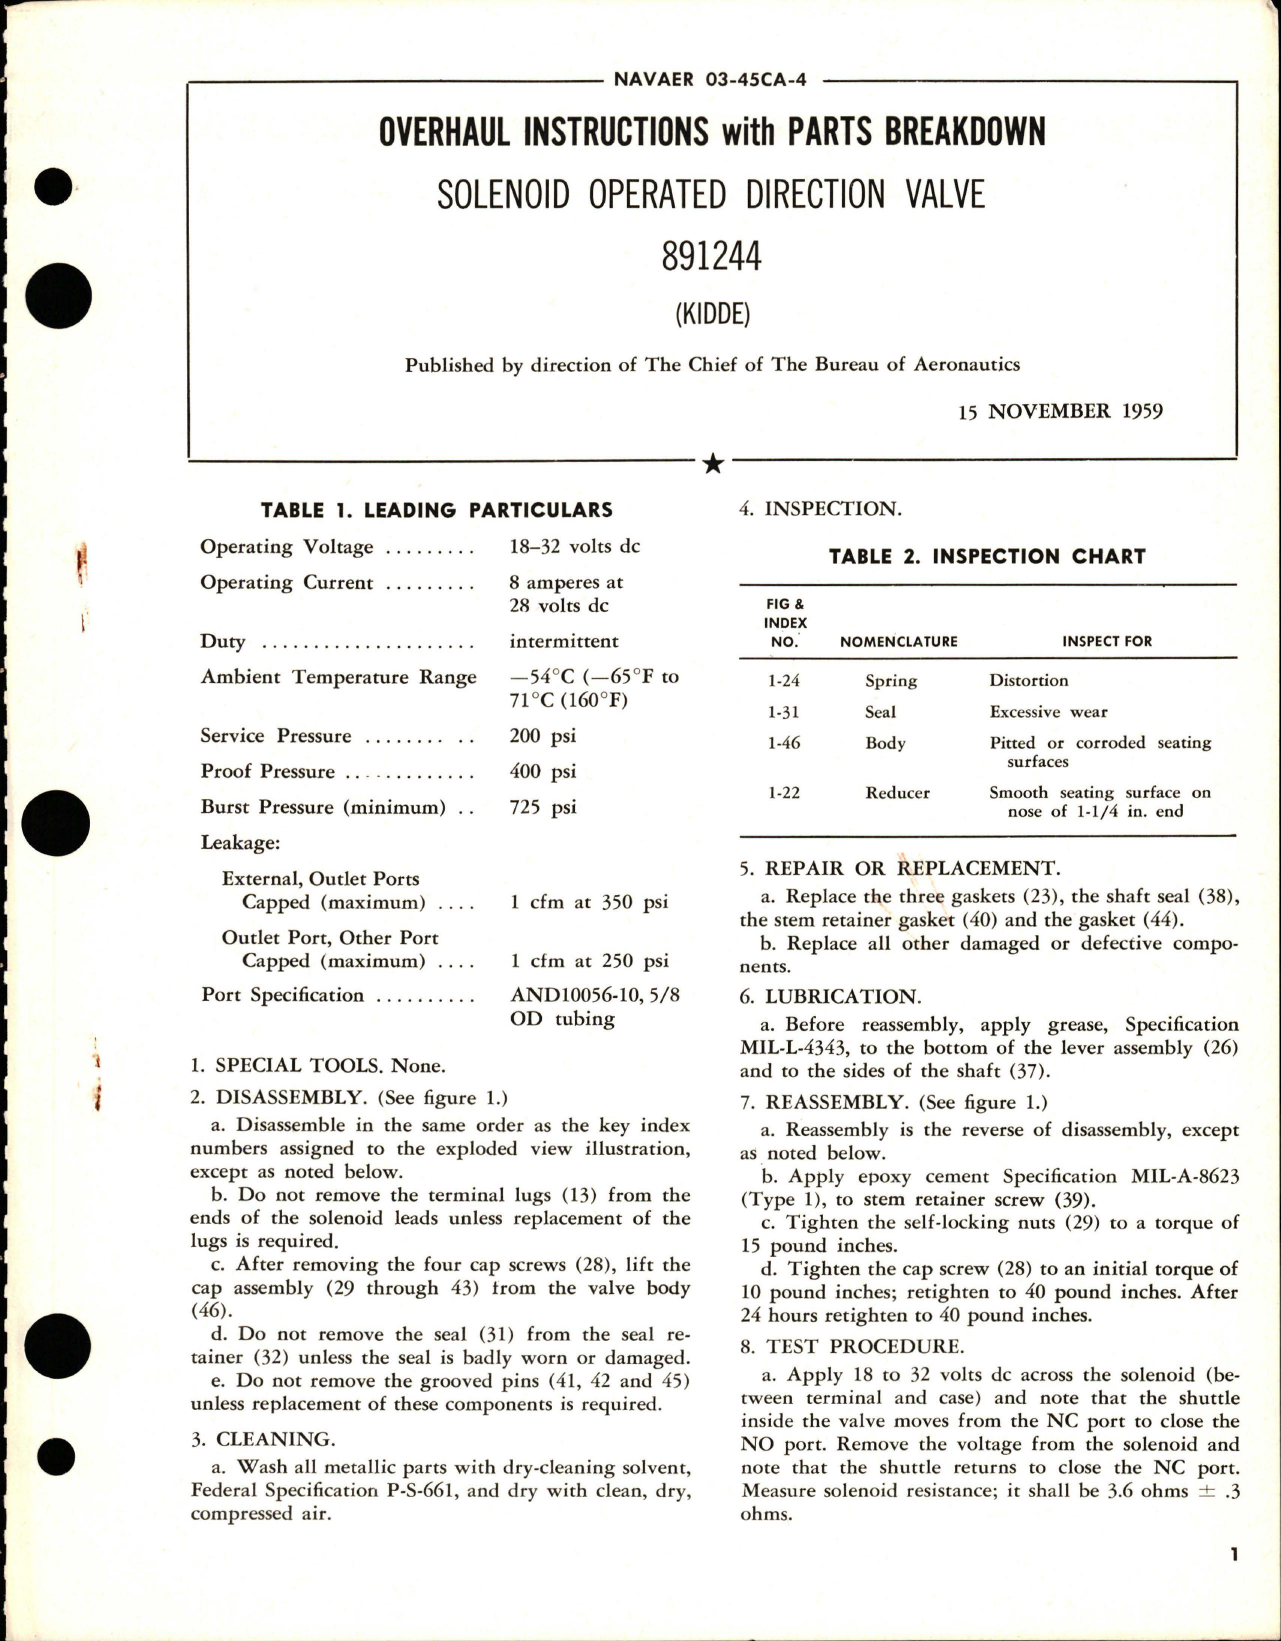 Sample page 1 from AirCorps Library document: Overhaul Instructions with Parts Breakdown for Solenoid Operated Direction Valve - 891244